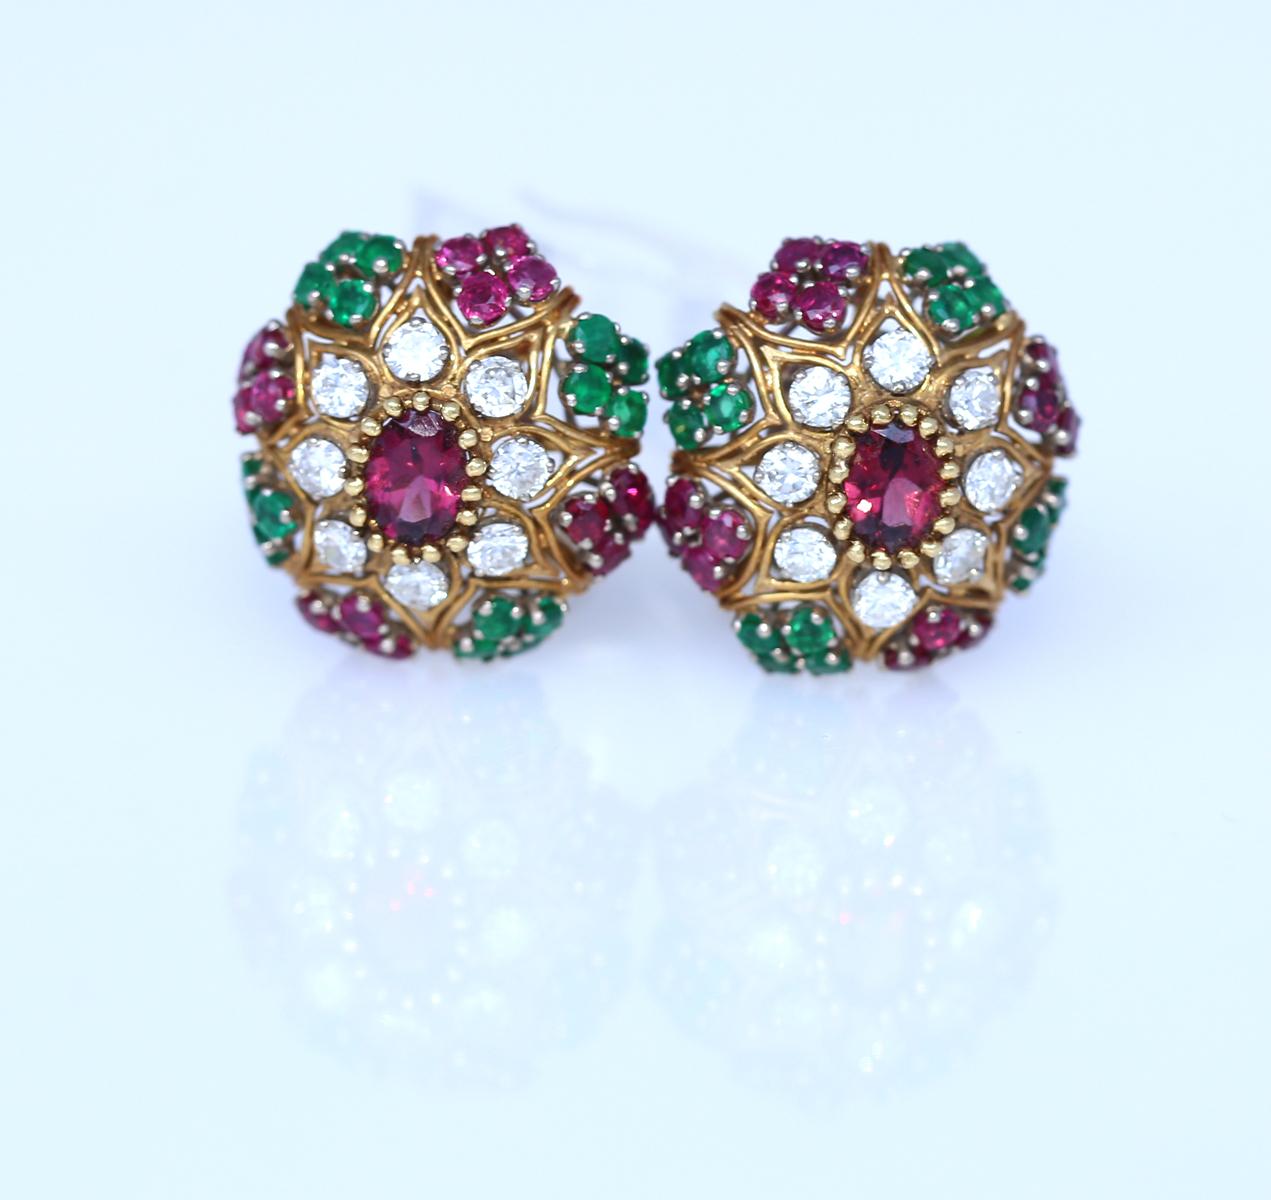 Emeralds with Diamonds and Tourmalines Clip-on Earrings. Fine earrings with Emeralds Diamonds Tourmalines. A colourful and elegant example of the 1970-es era. Attracting attention as the real 70es Diva should. 18 Karat Yellow Gold.
A stylish item